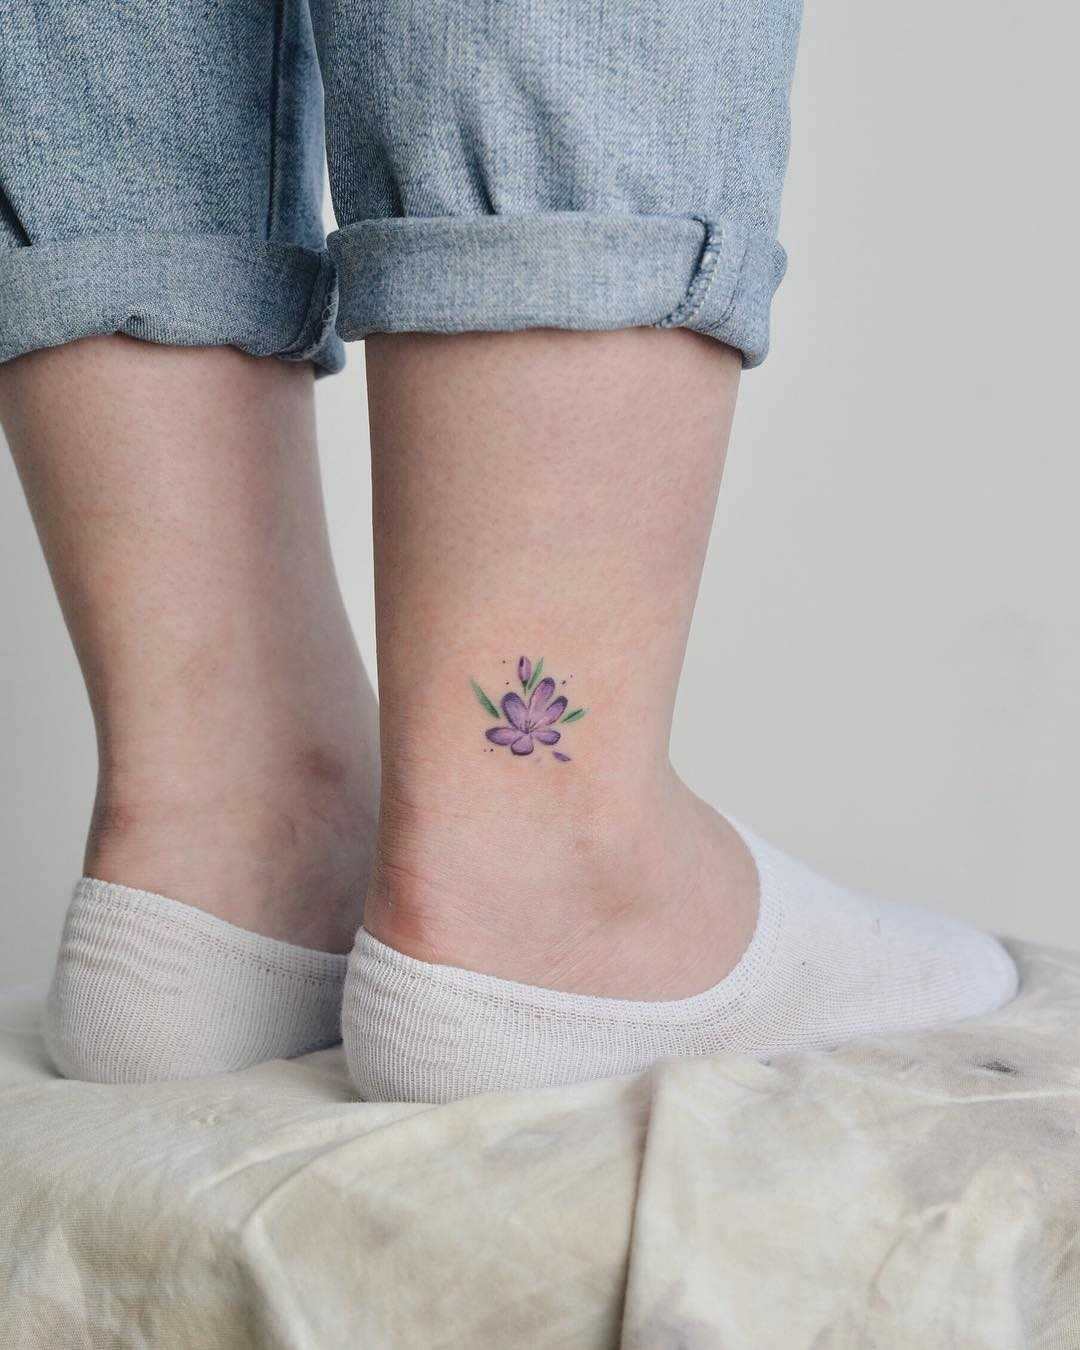 Floral tattoo on ankle8